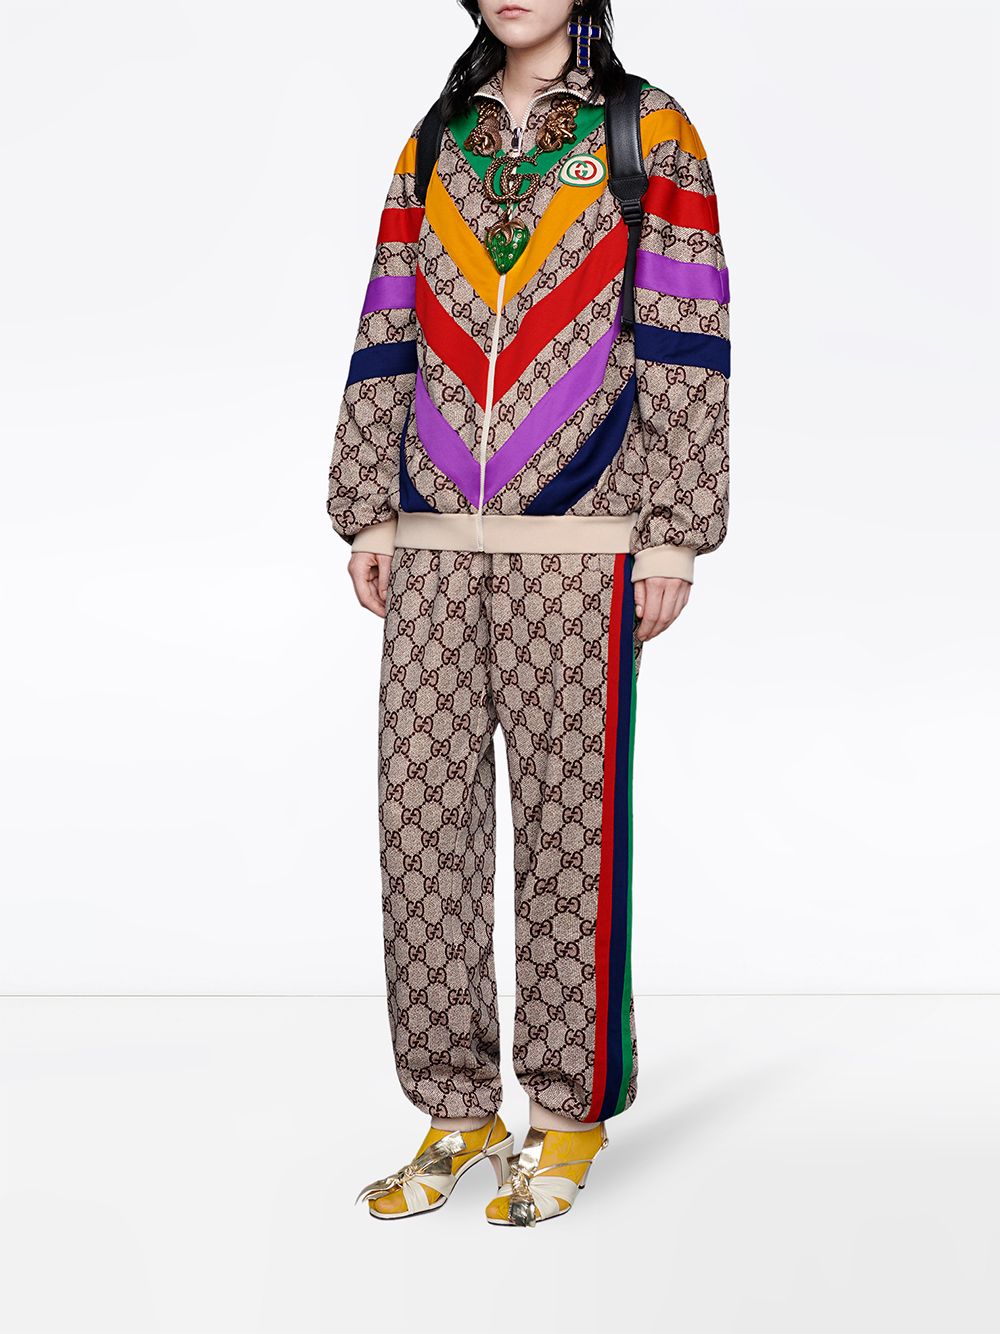 Shop Gucci GG Supreme print jacket with Express Delivery - Farfetch